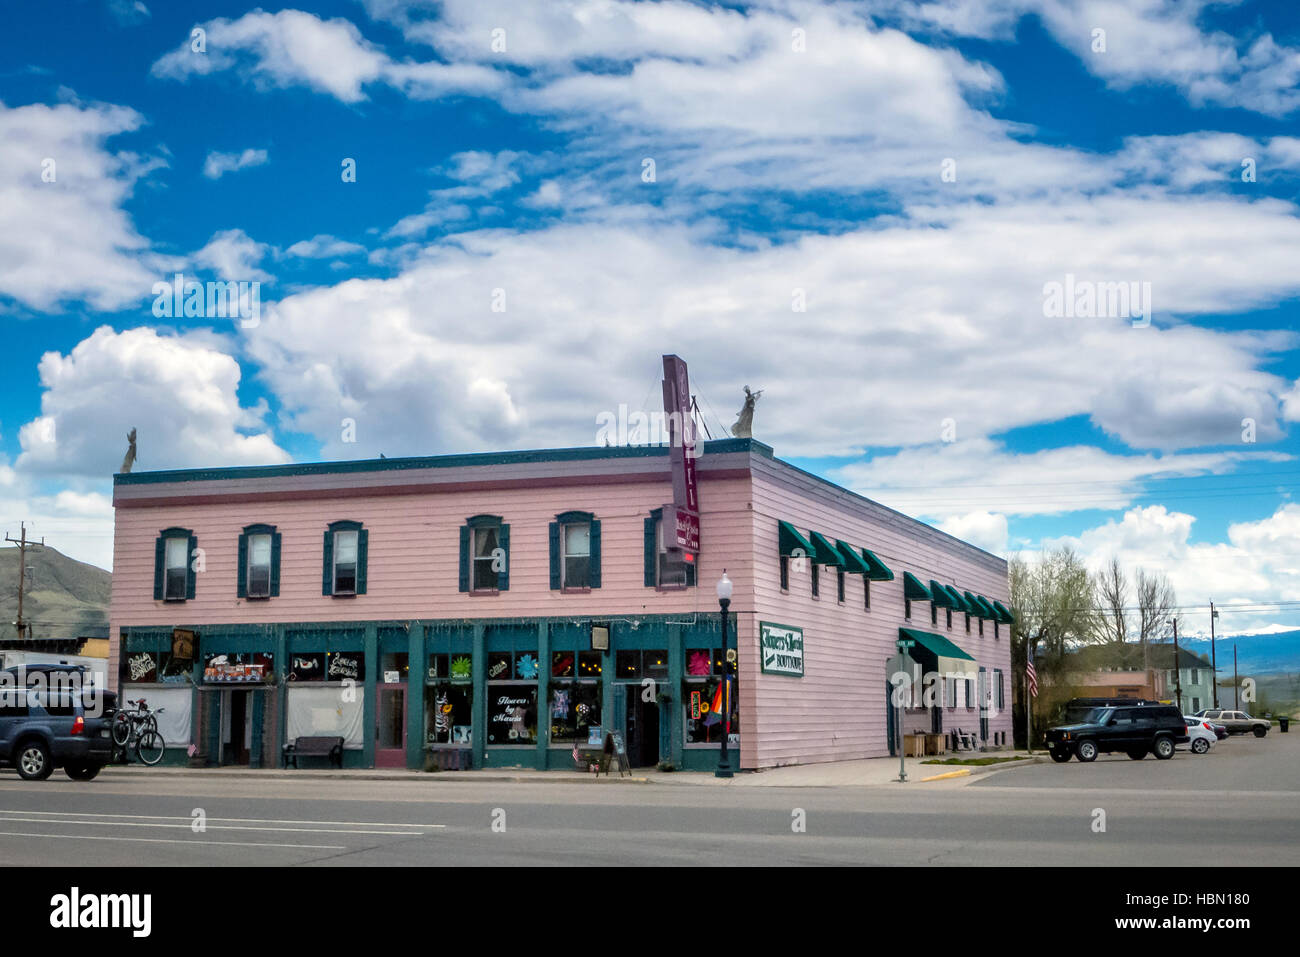 Typical Main Street store in small town America Stock Photo